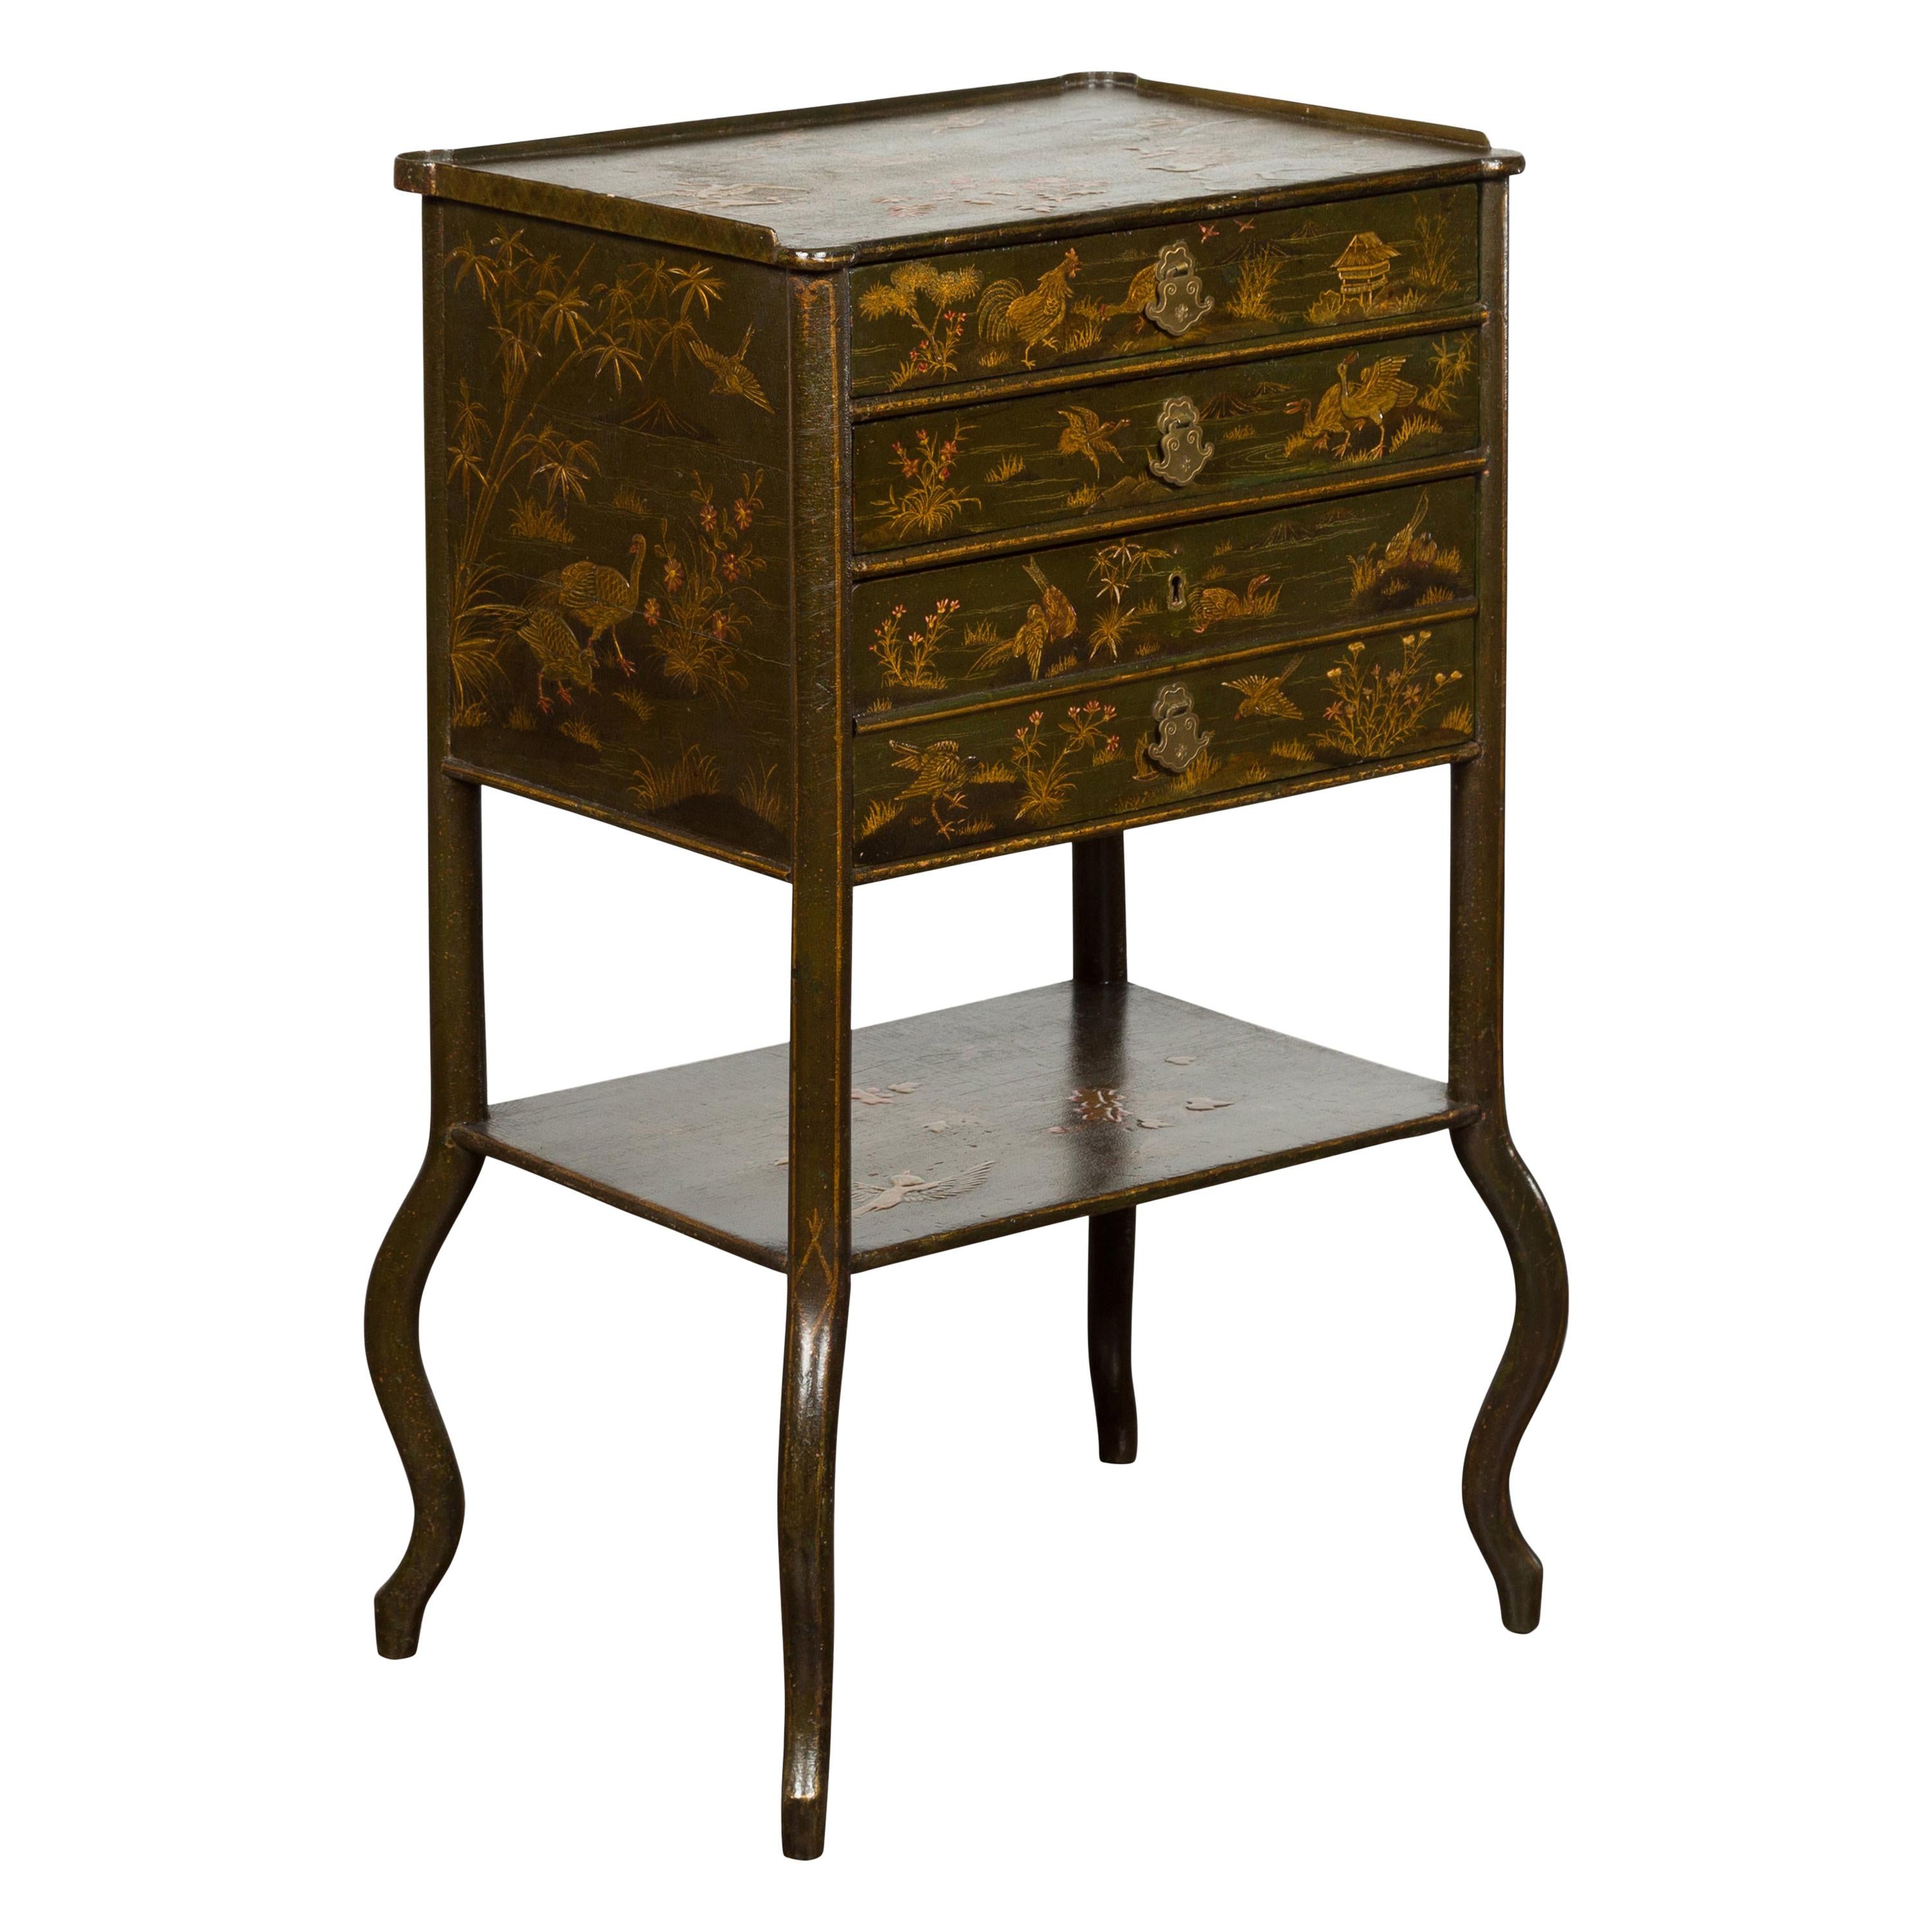 English 19th Century Chinoiserie Table with Four Drawers, Shelf and Curving Legs